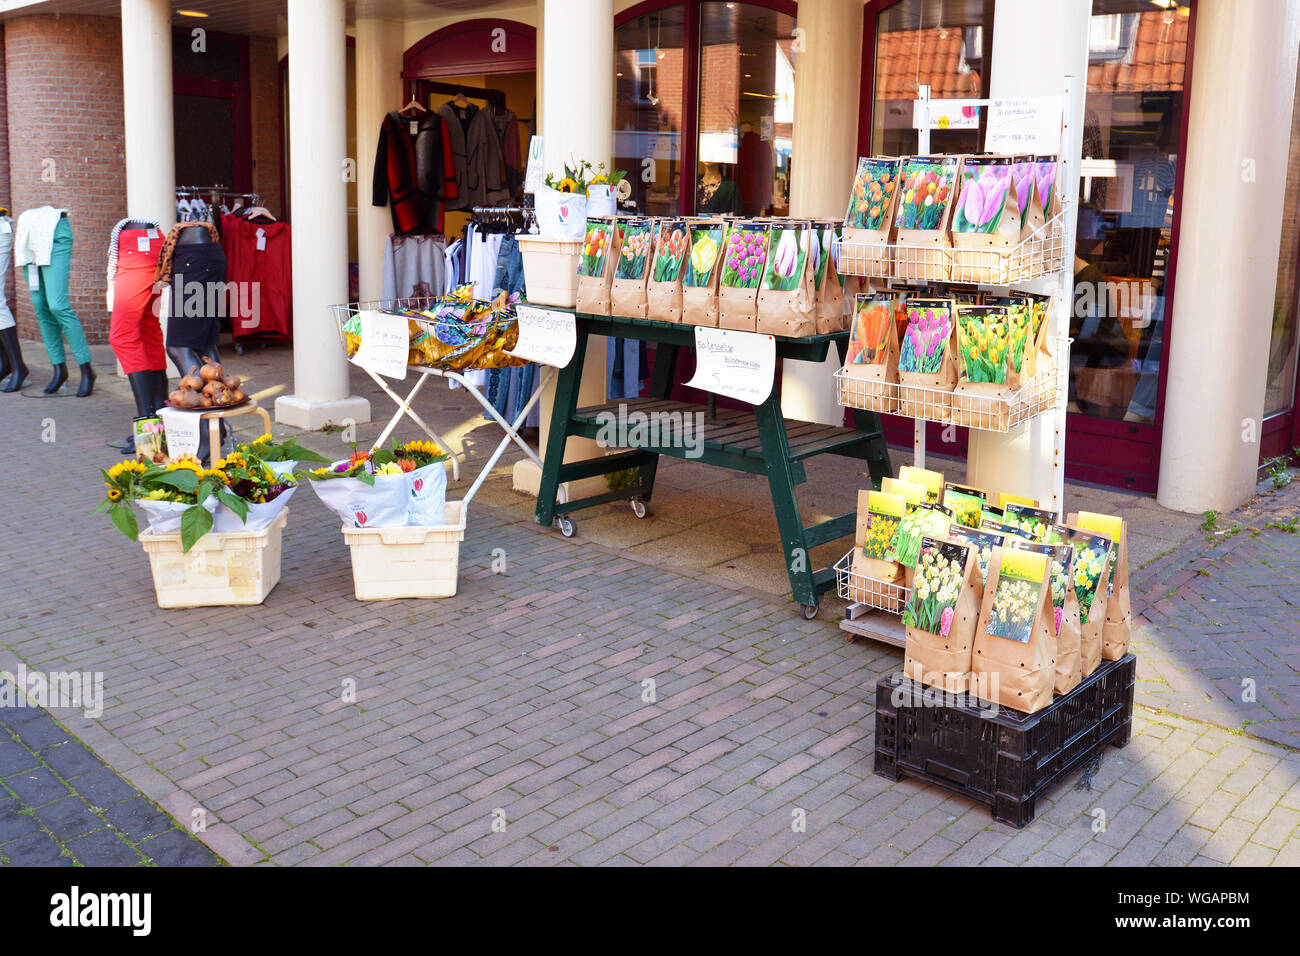 Den Burg, Texel / North Netherlands - August 2019: Booth with dutch tulip bulbs being sold in the streets Stock Photo